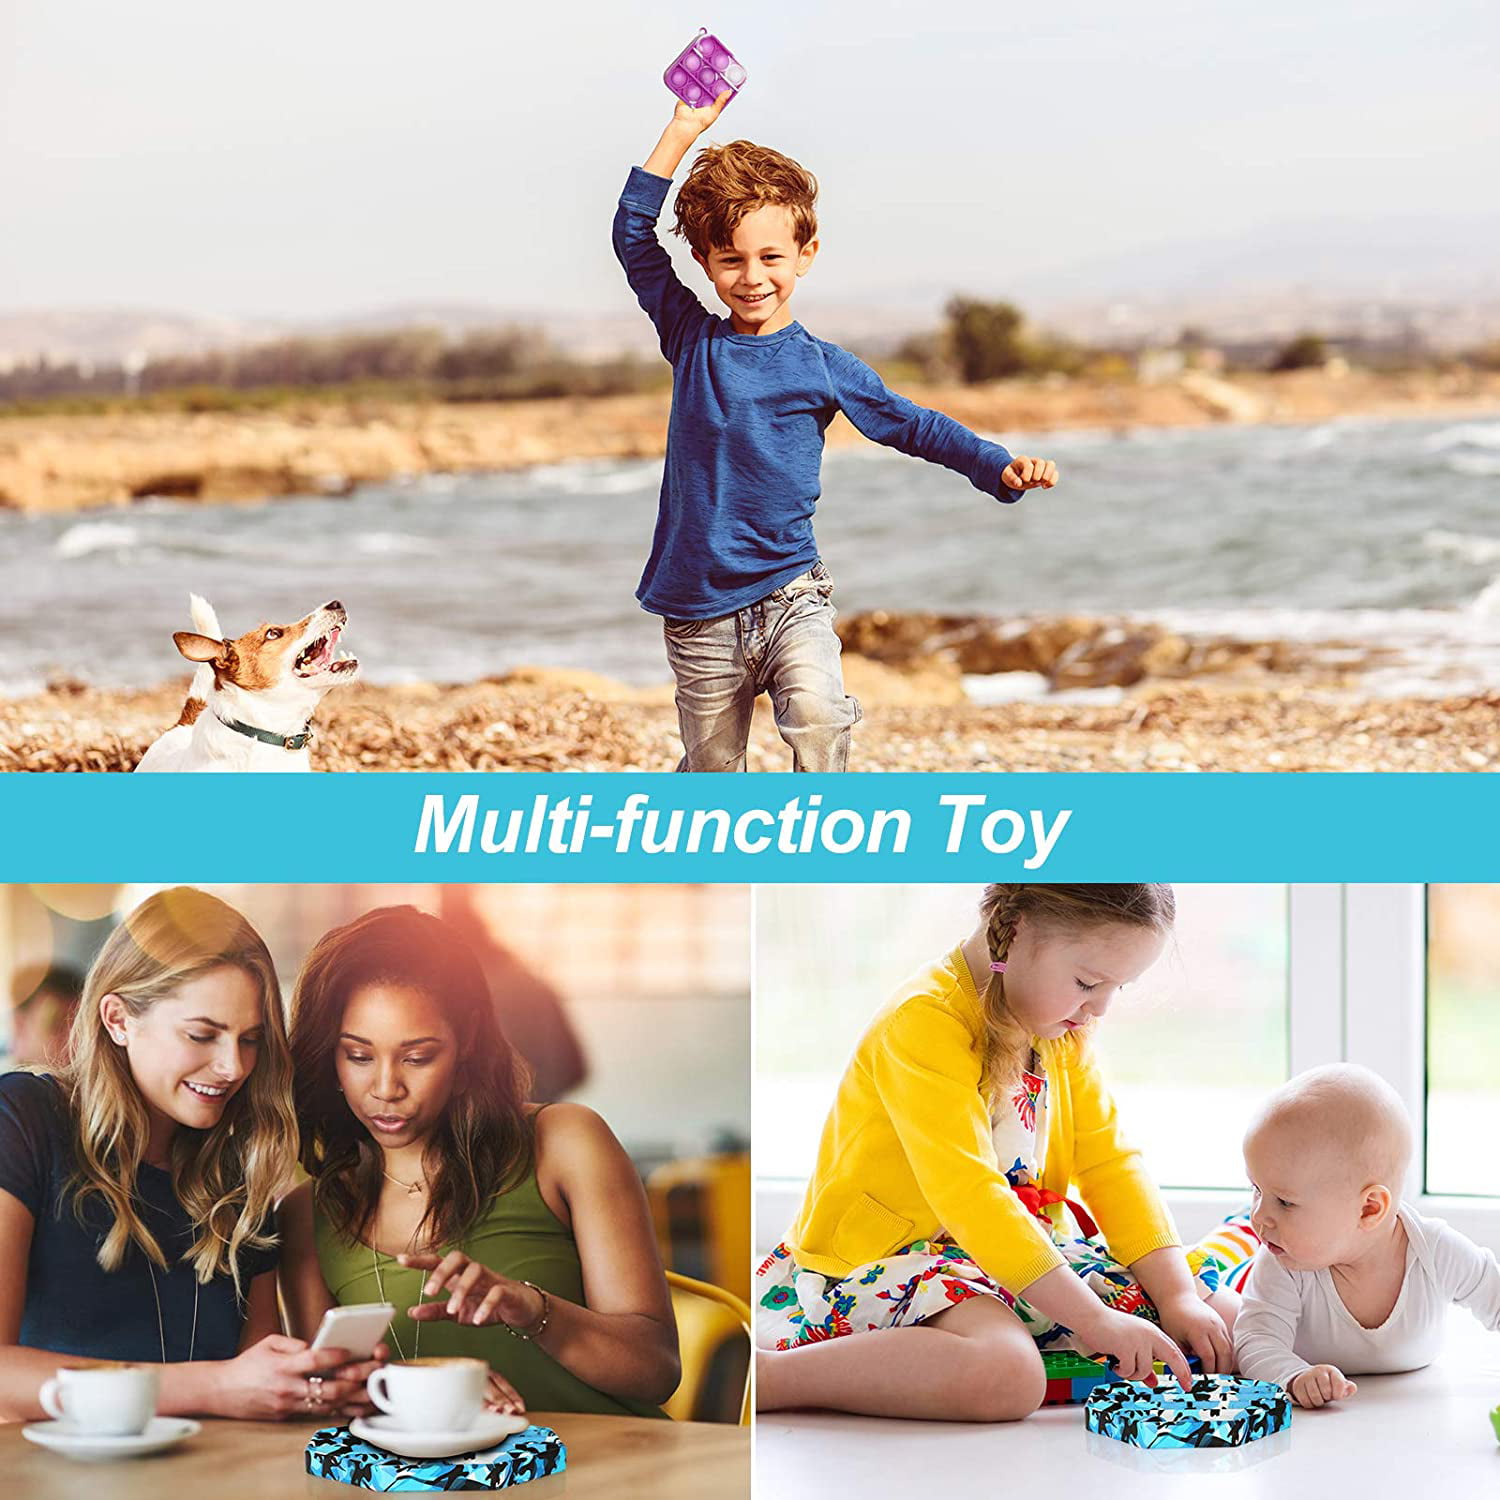 Octagon+Min-G Bonus Mini Squeeze Sensory Toy Silicone Stress Reliever Toy,Special Needs Stress Reliever,for Kids,Family,Students,and Friends Push Pop Bubble Sensory Fidget Toy